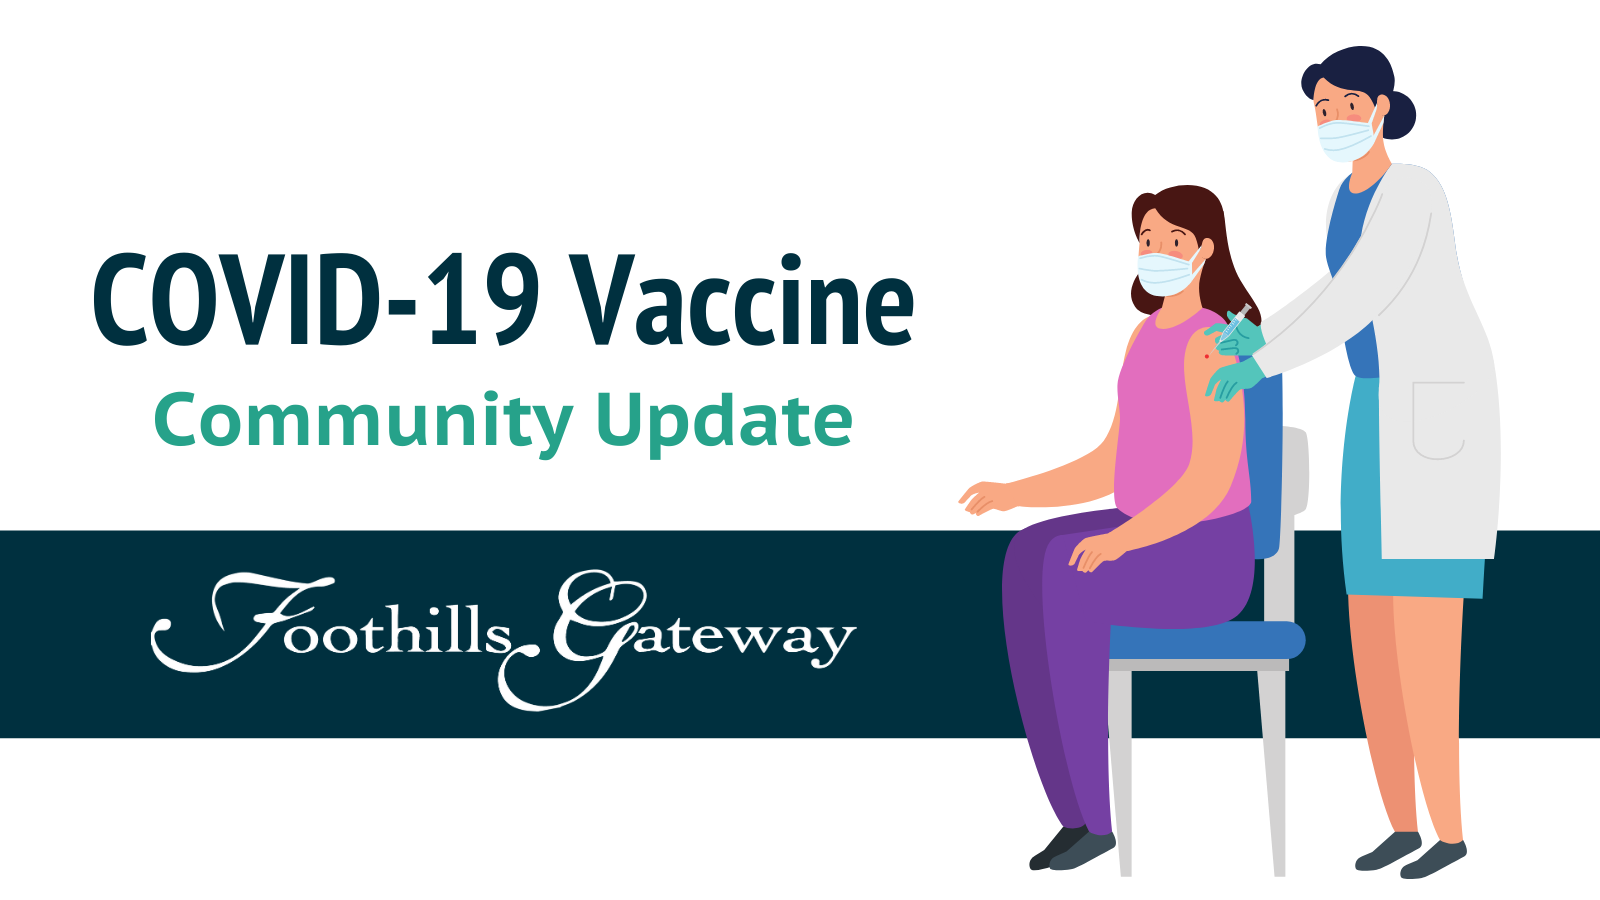 title: COVID-19 Vaccine, Community Update, Foothills Gateway logo included with overlaid image of a doctor giving a woman a shot, both of them wearing masks.